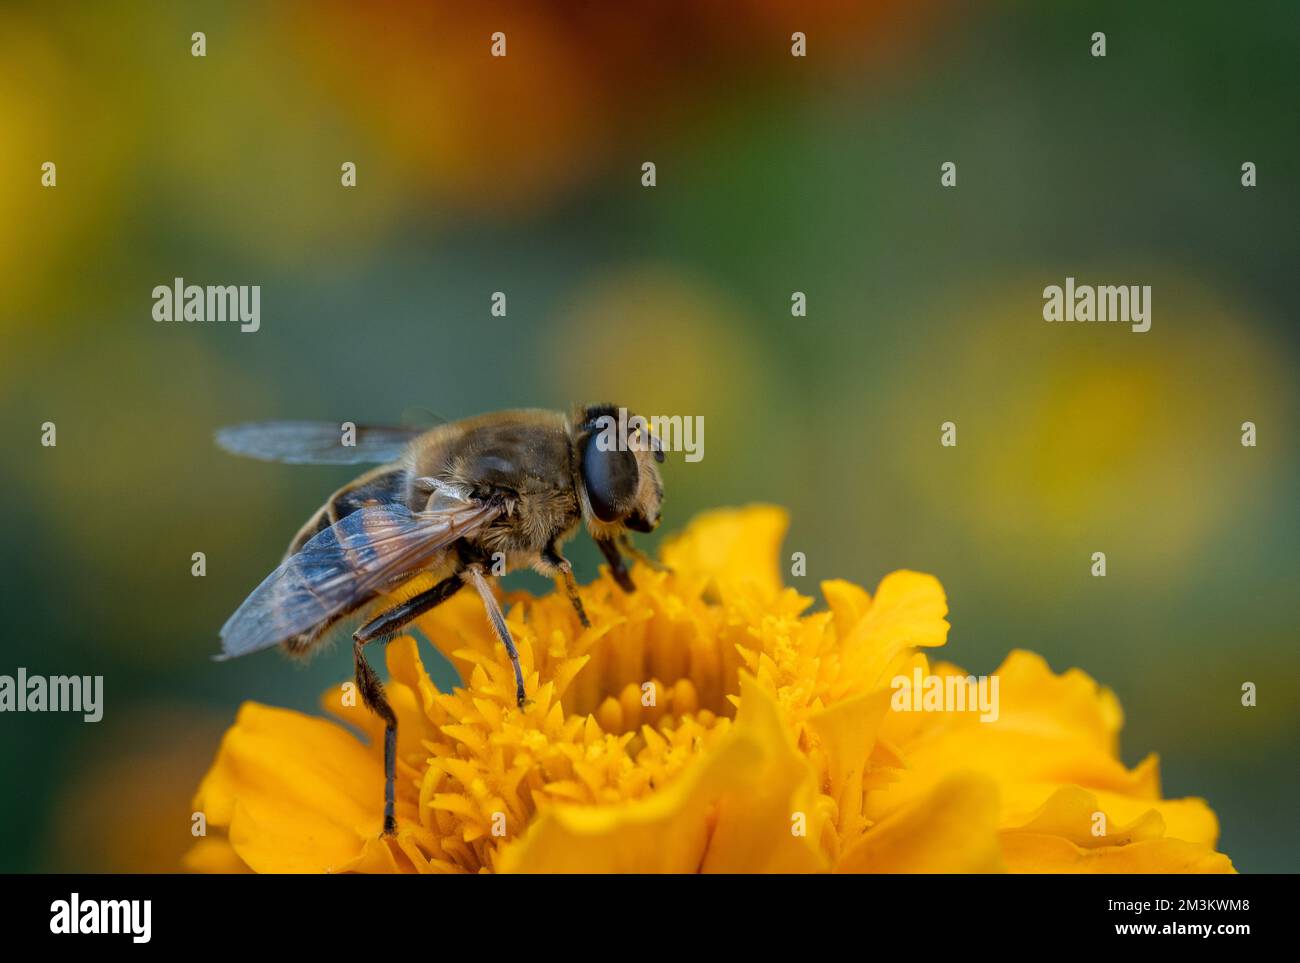 A closeup of bee sipping nectar from yello flower Stock Photo